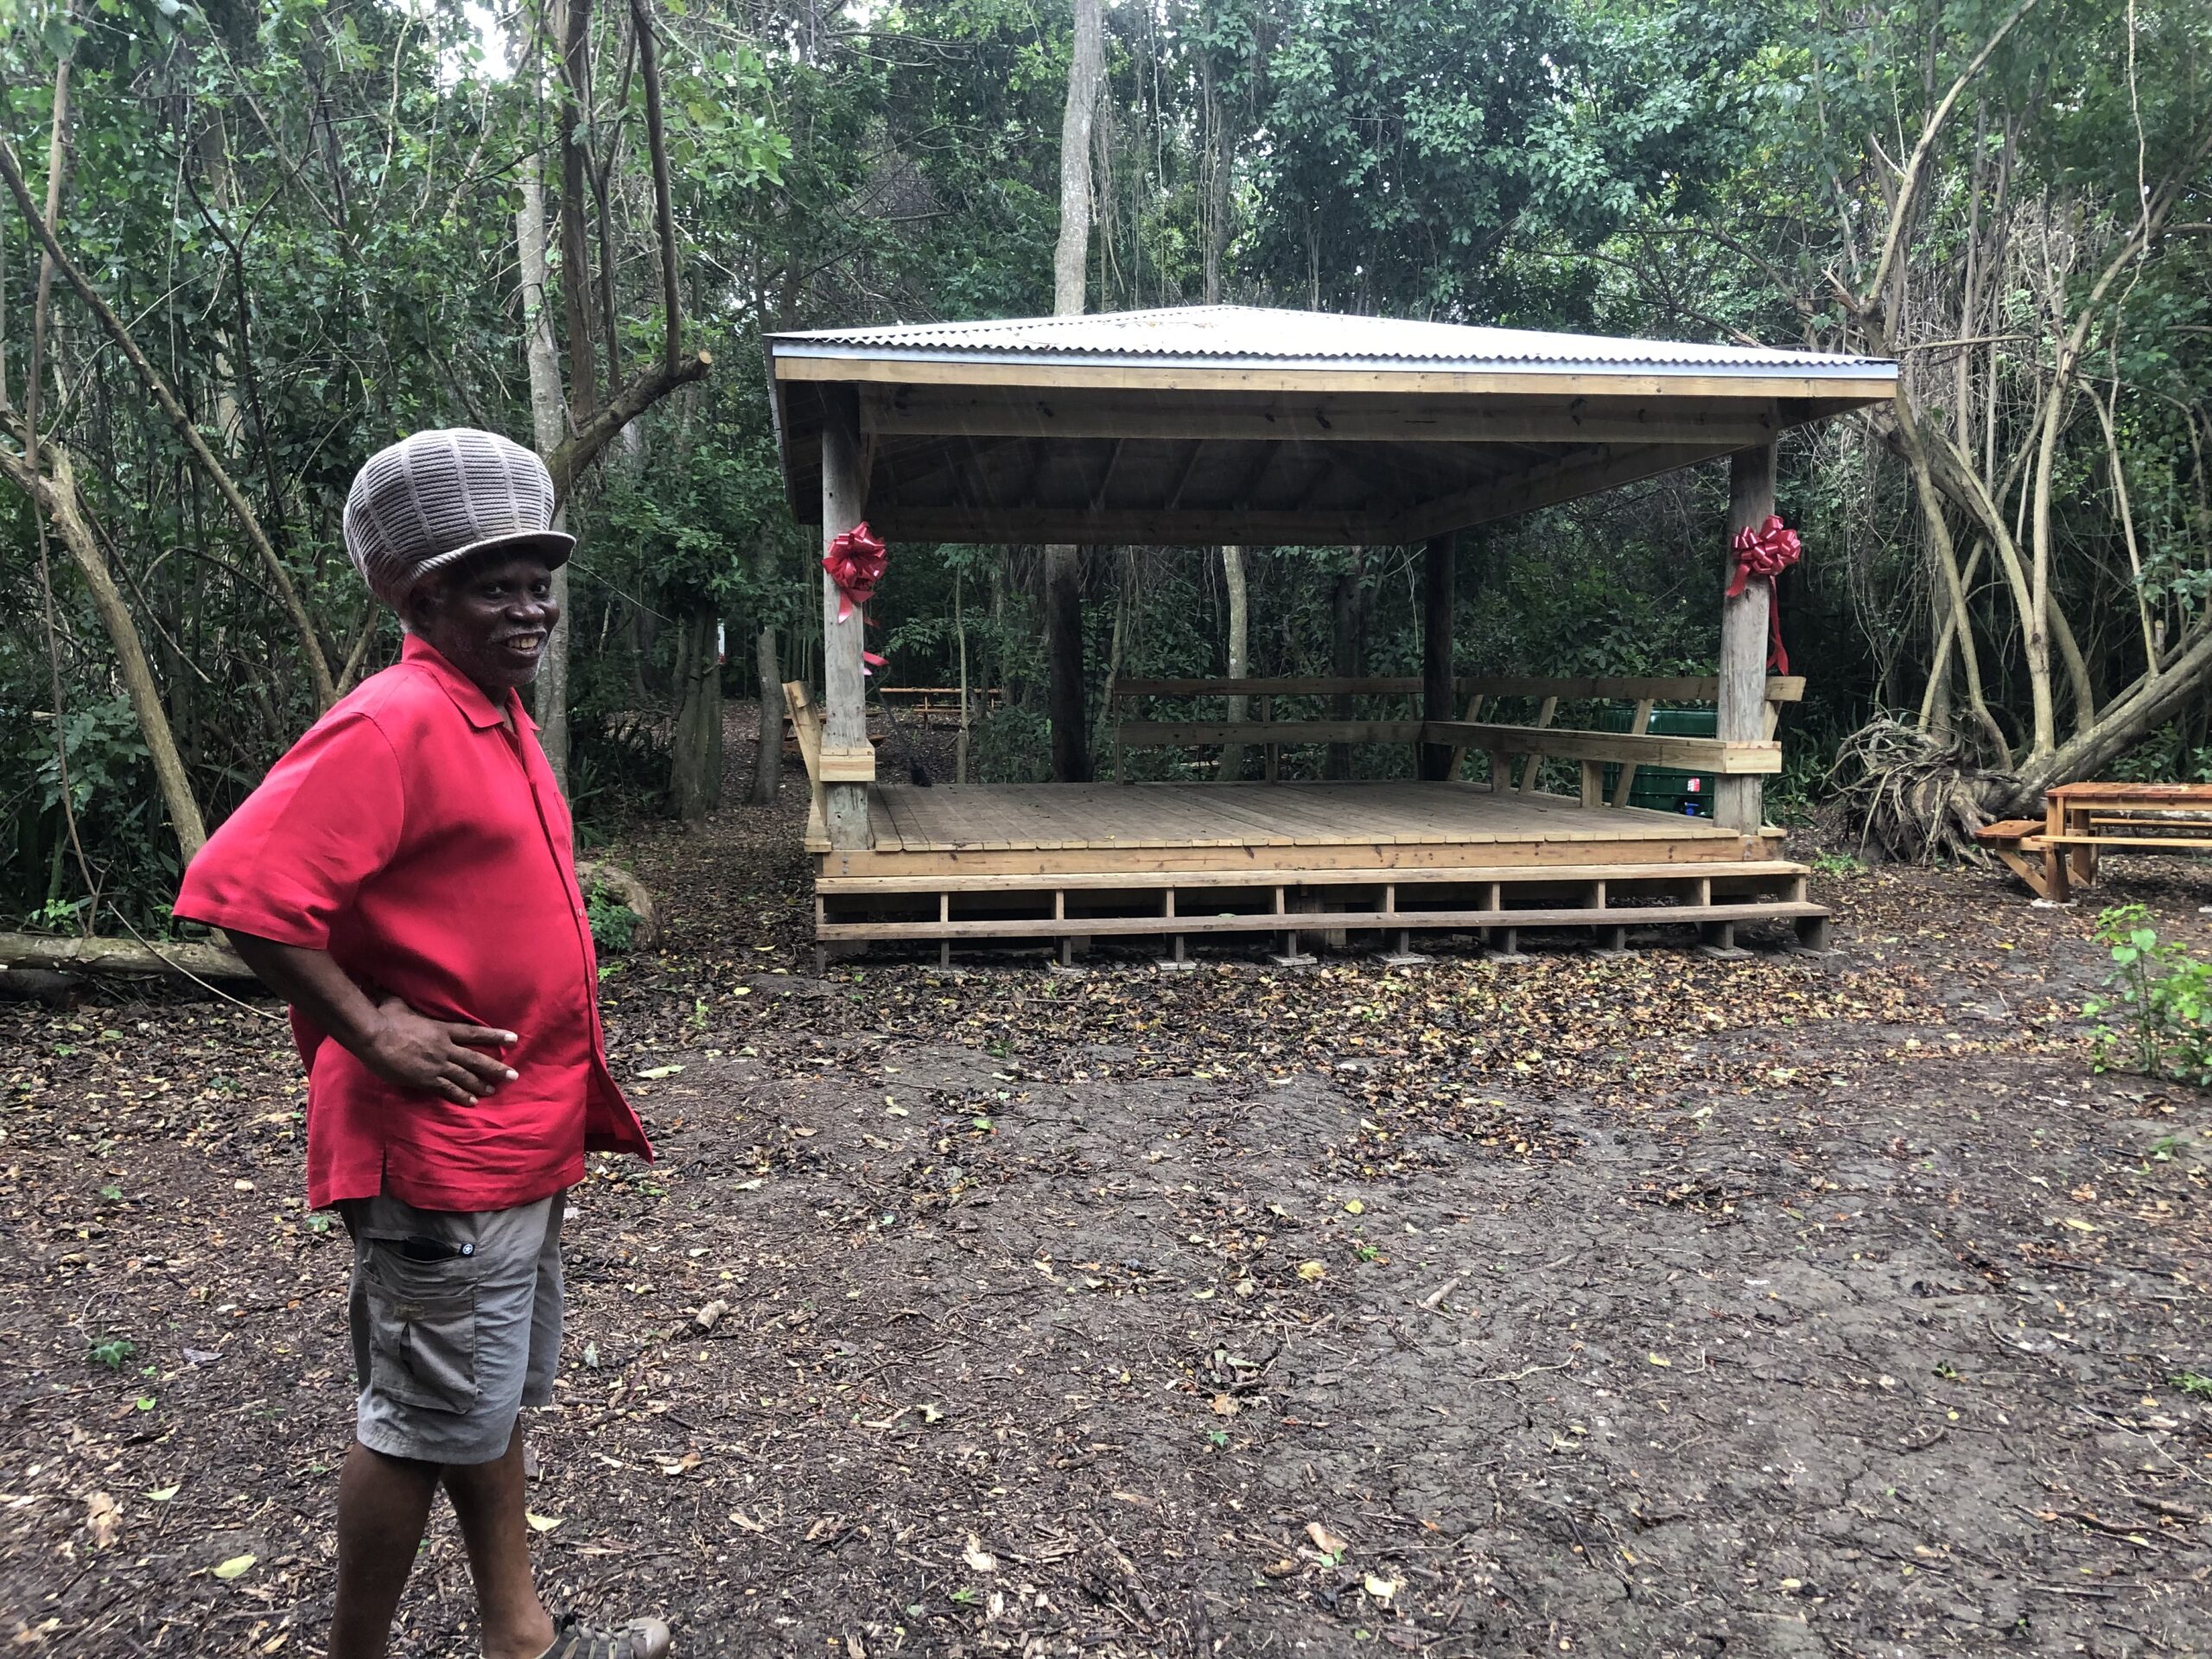 Olasee Davis at the Estate Adventure Pavilion and Trail on St. Croix, which was made possible thanks to the joint effort of AARP in the Virgin Islands, the V.I. Trail Alliance and community partners, including My Brother’s Workshop. (Source photo by Sian Cobb)